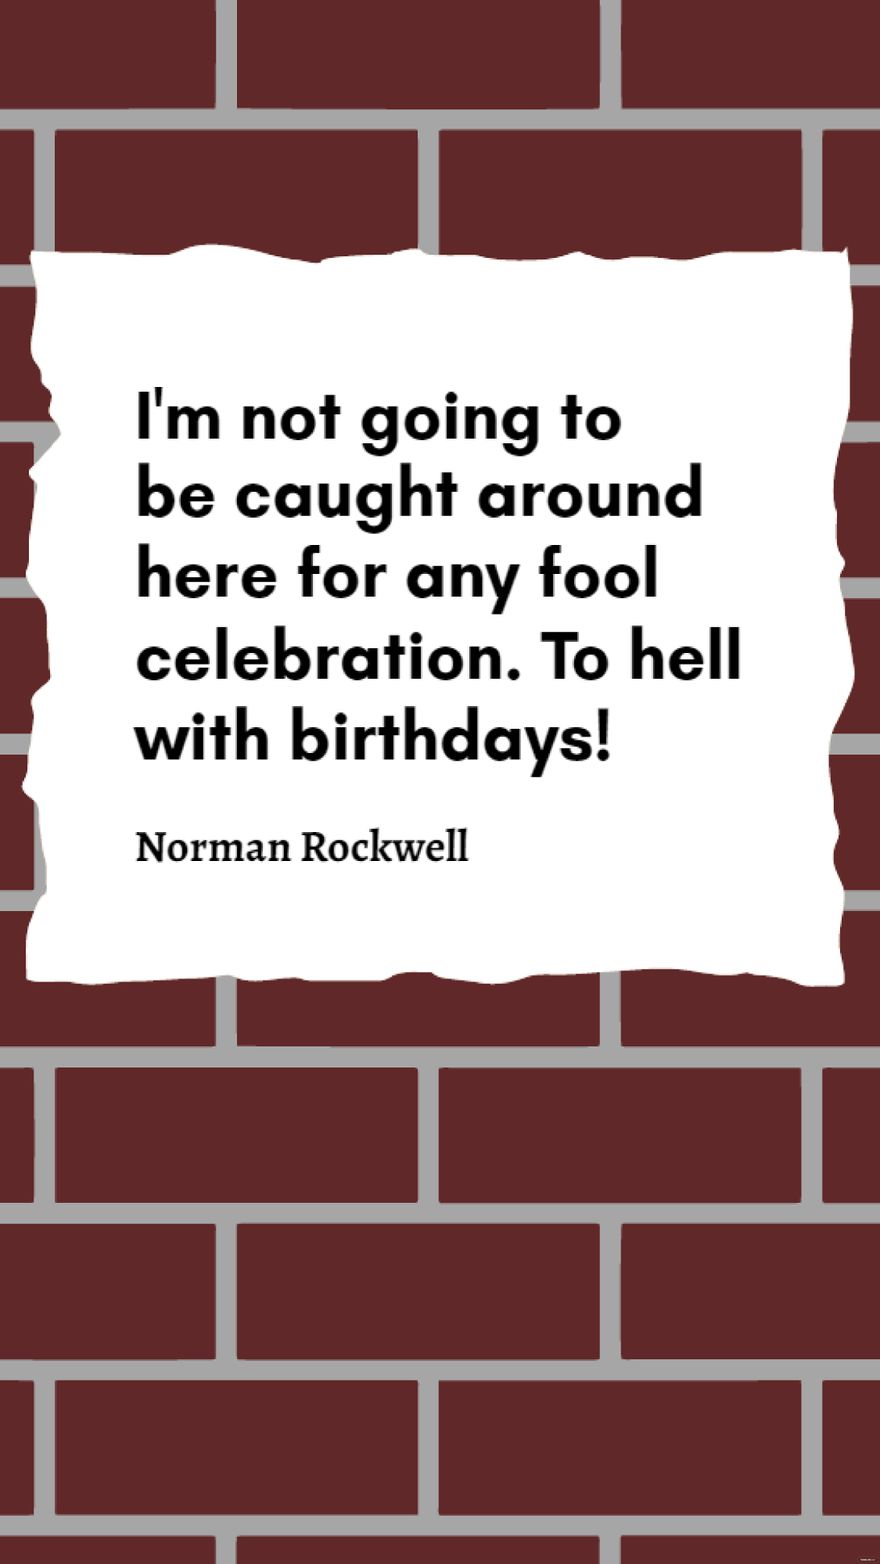 Free Norman Rockwell - I'm not going to be caught around here for any fool celebration. To hell with birthdays! in JPG